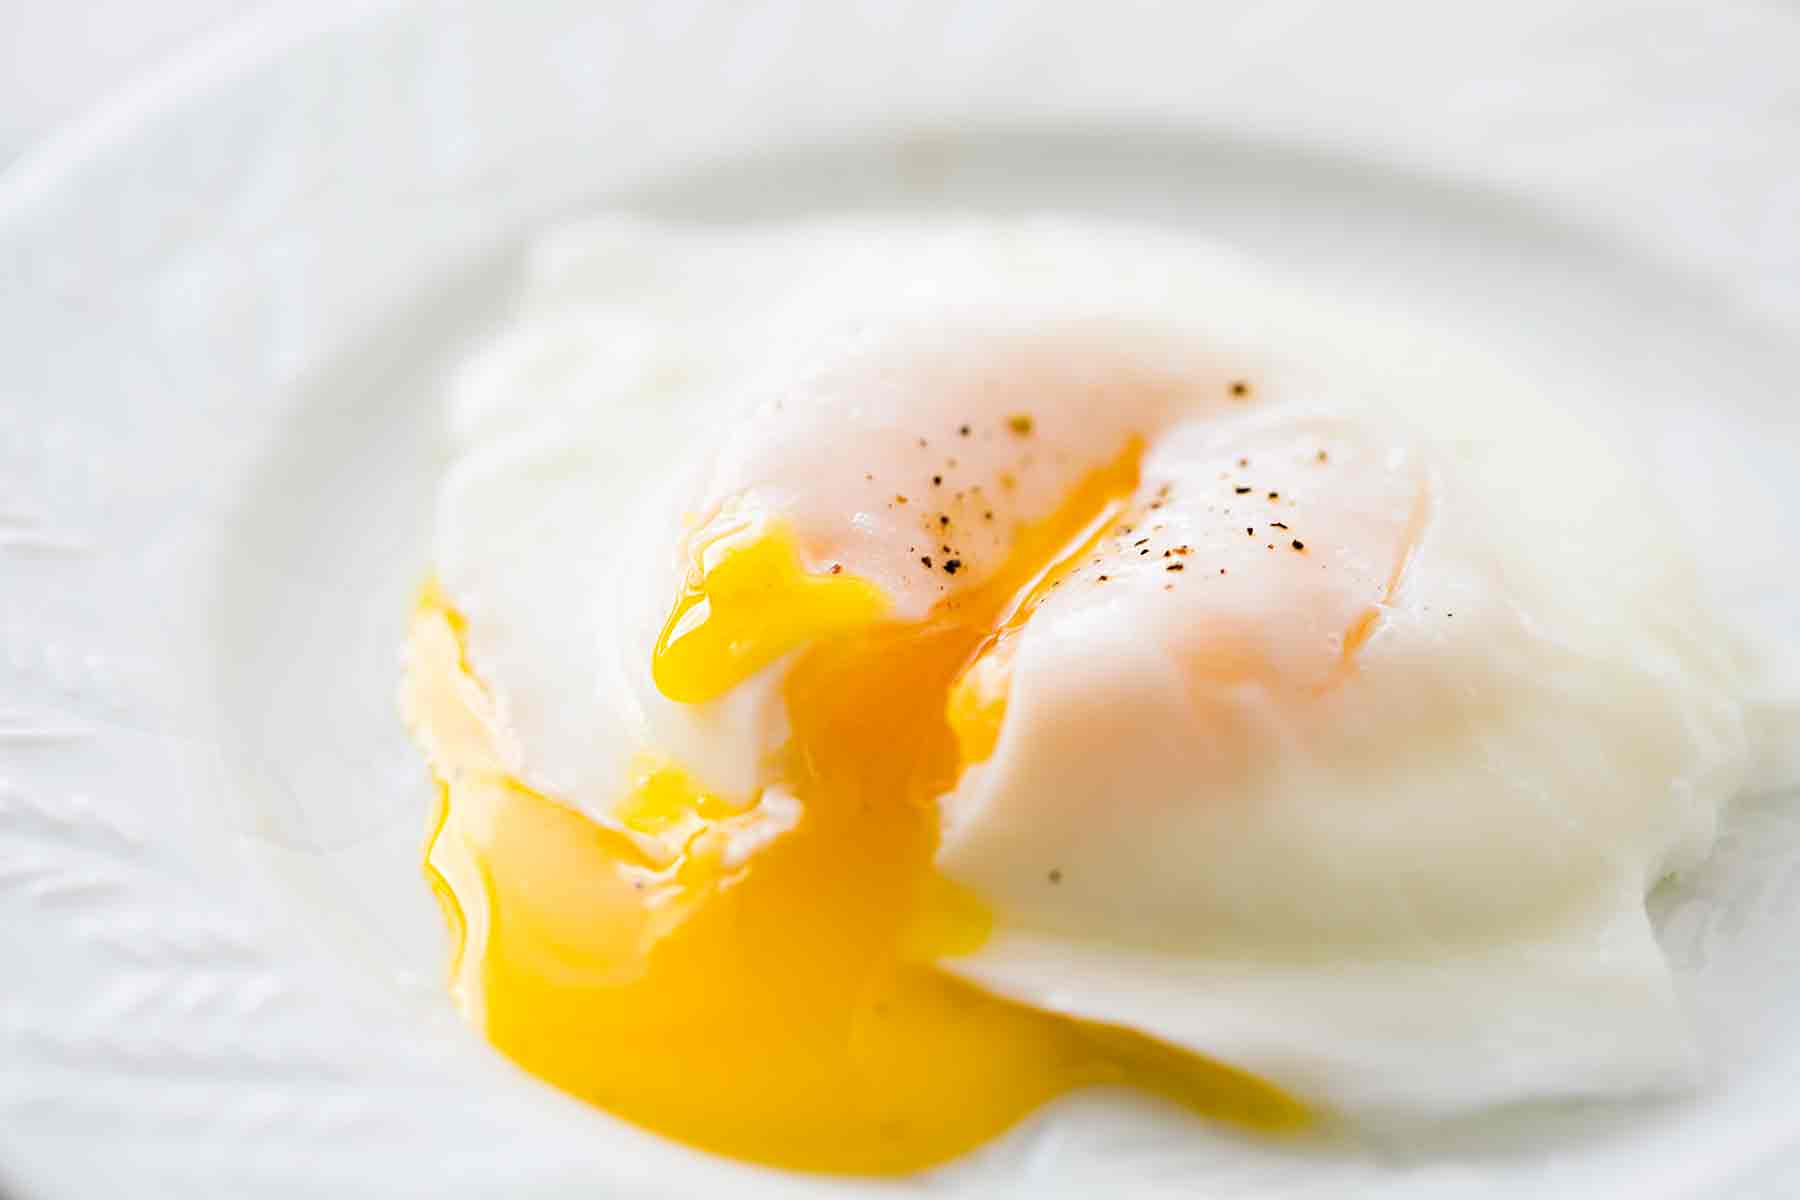 Say “Yuck” Or “Yum” to These Foods and We’ll Determine Your Exact Age Runny Eggs